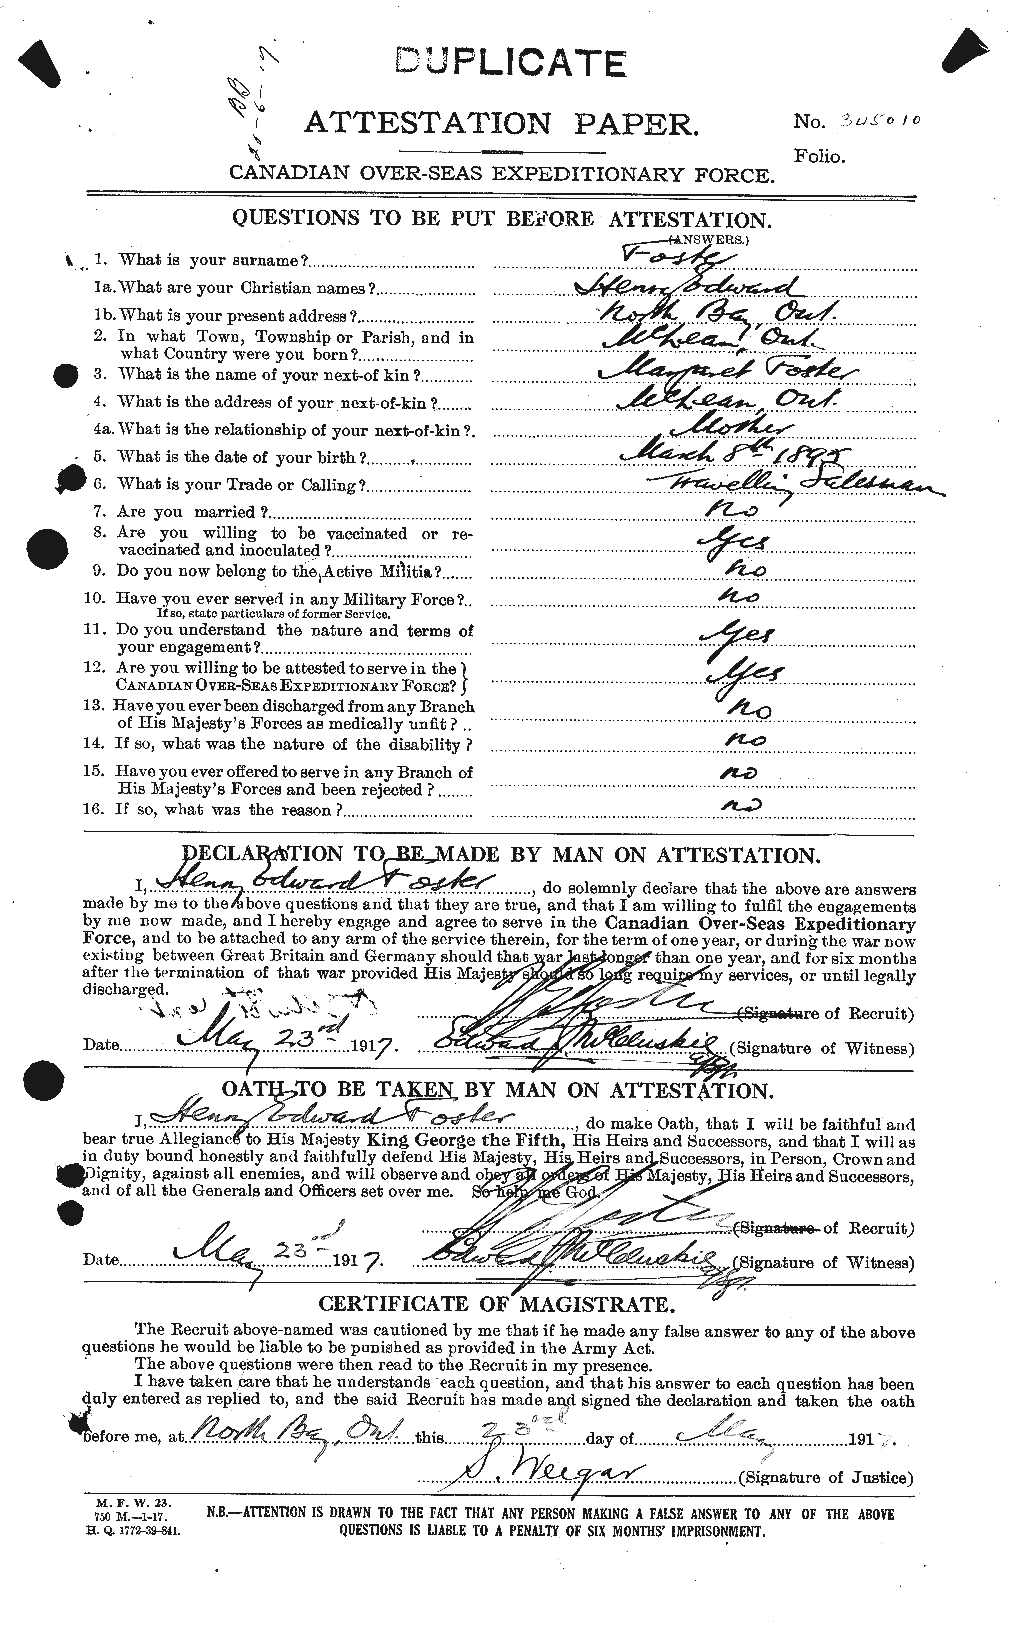 Personnel Records of the First World War - CEF 333248a